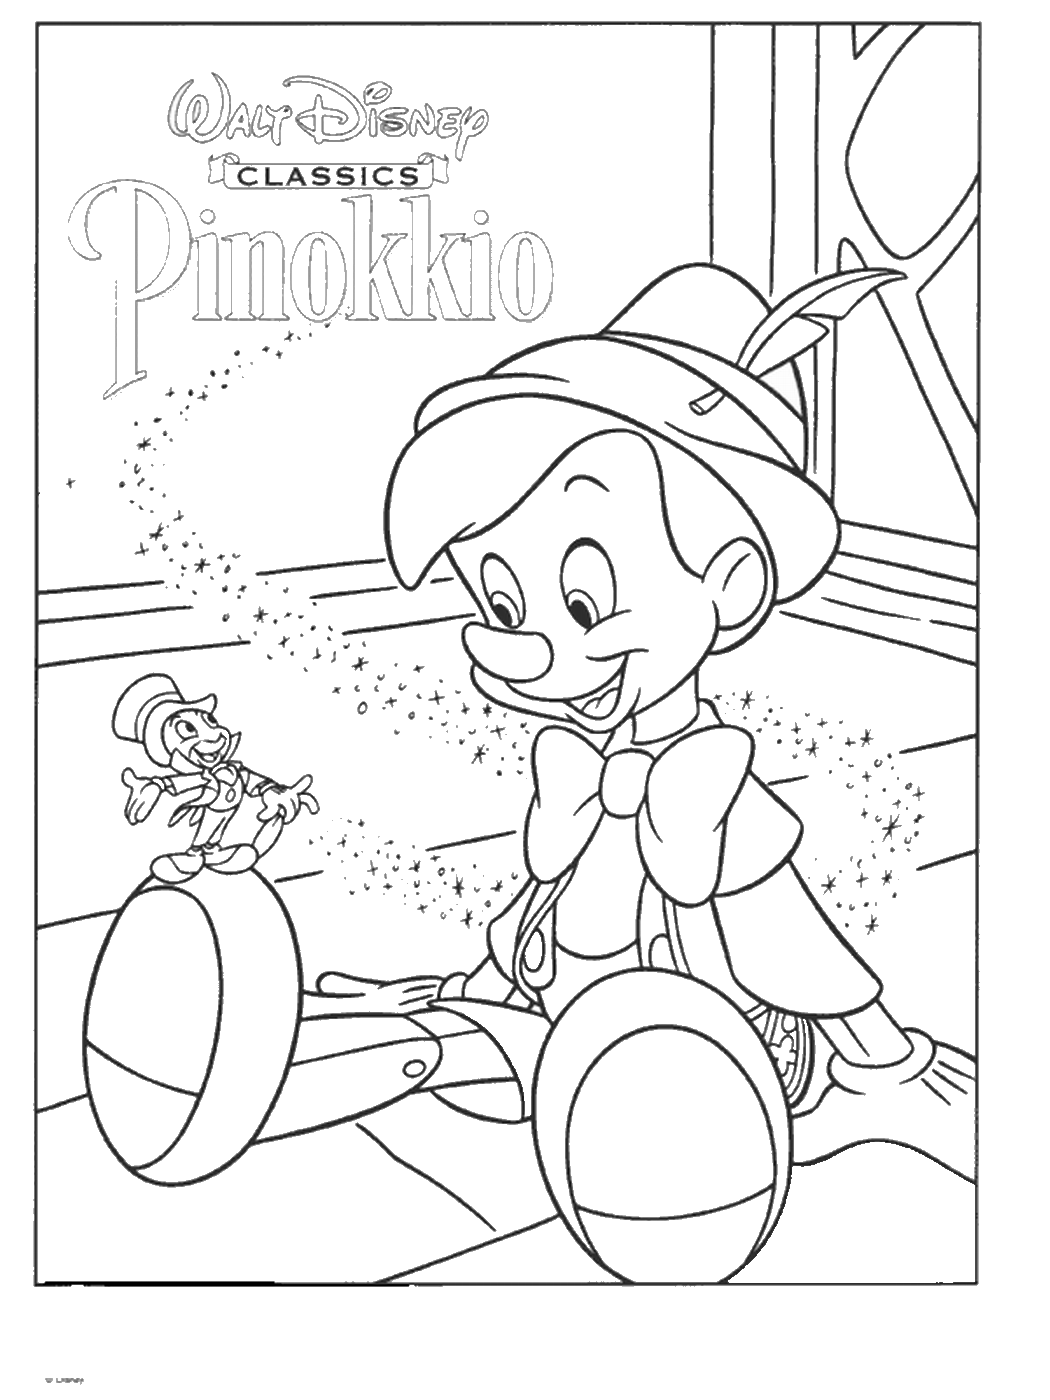 Pinocchio Coloring Pages TV Film Pinocchio_coloring_19 Printable 2020 06331 Coloring4free